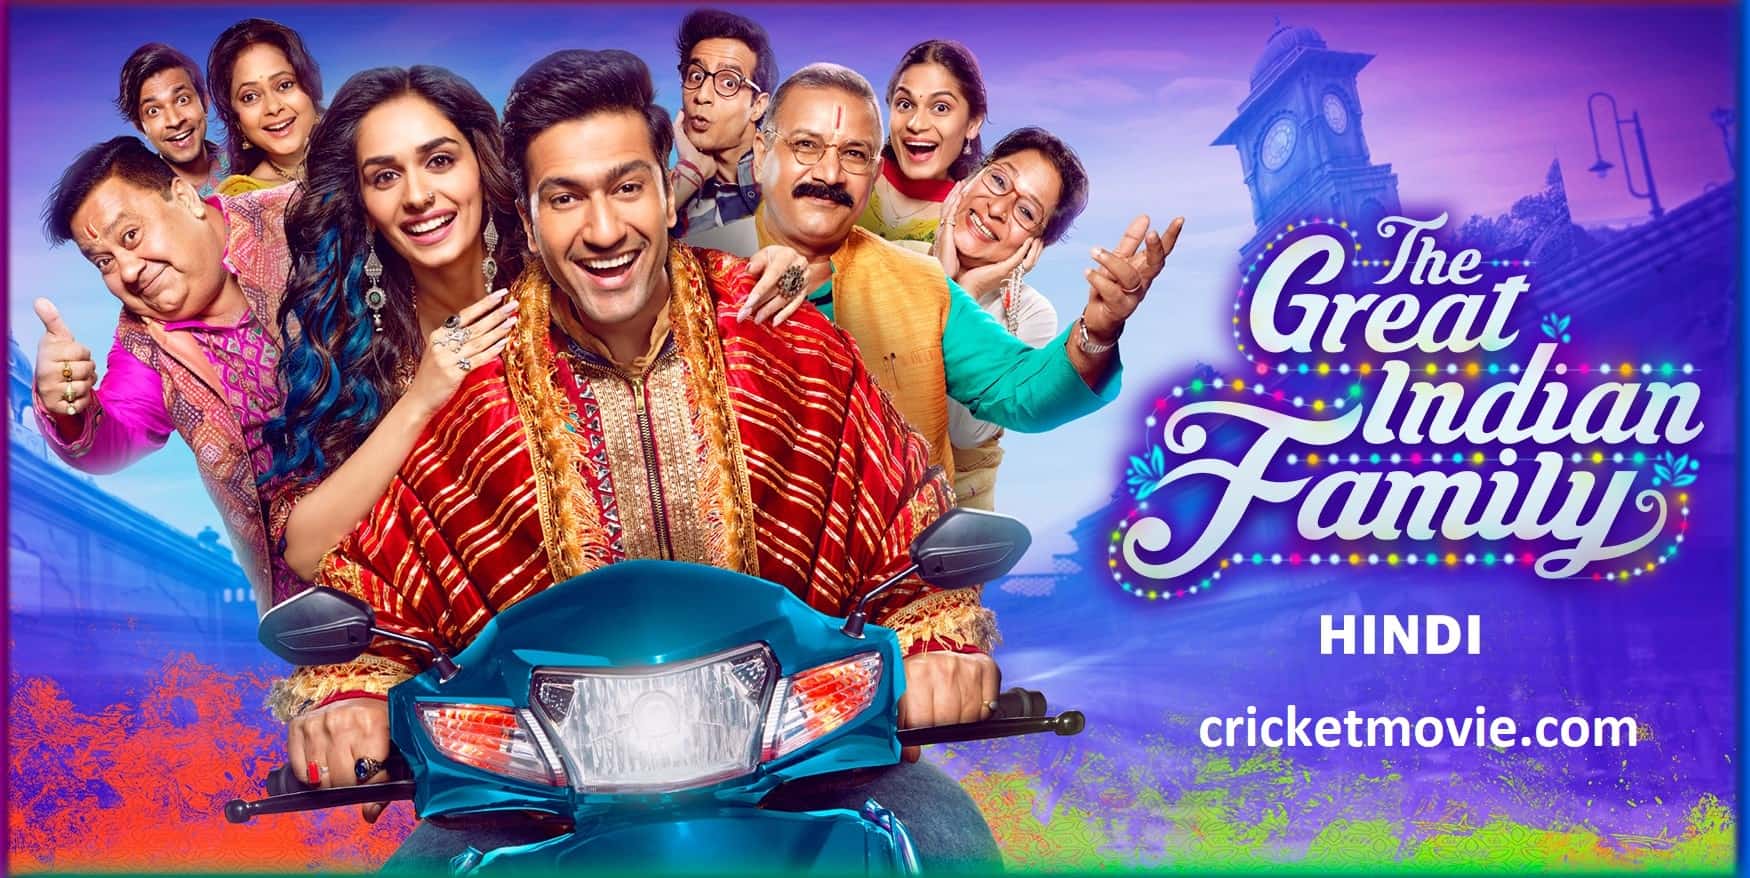 The Great Indian Family On Prime-cricketmovie.com